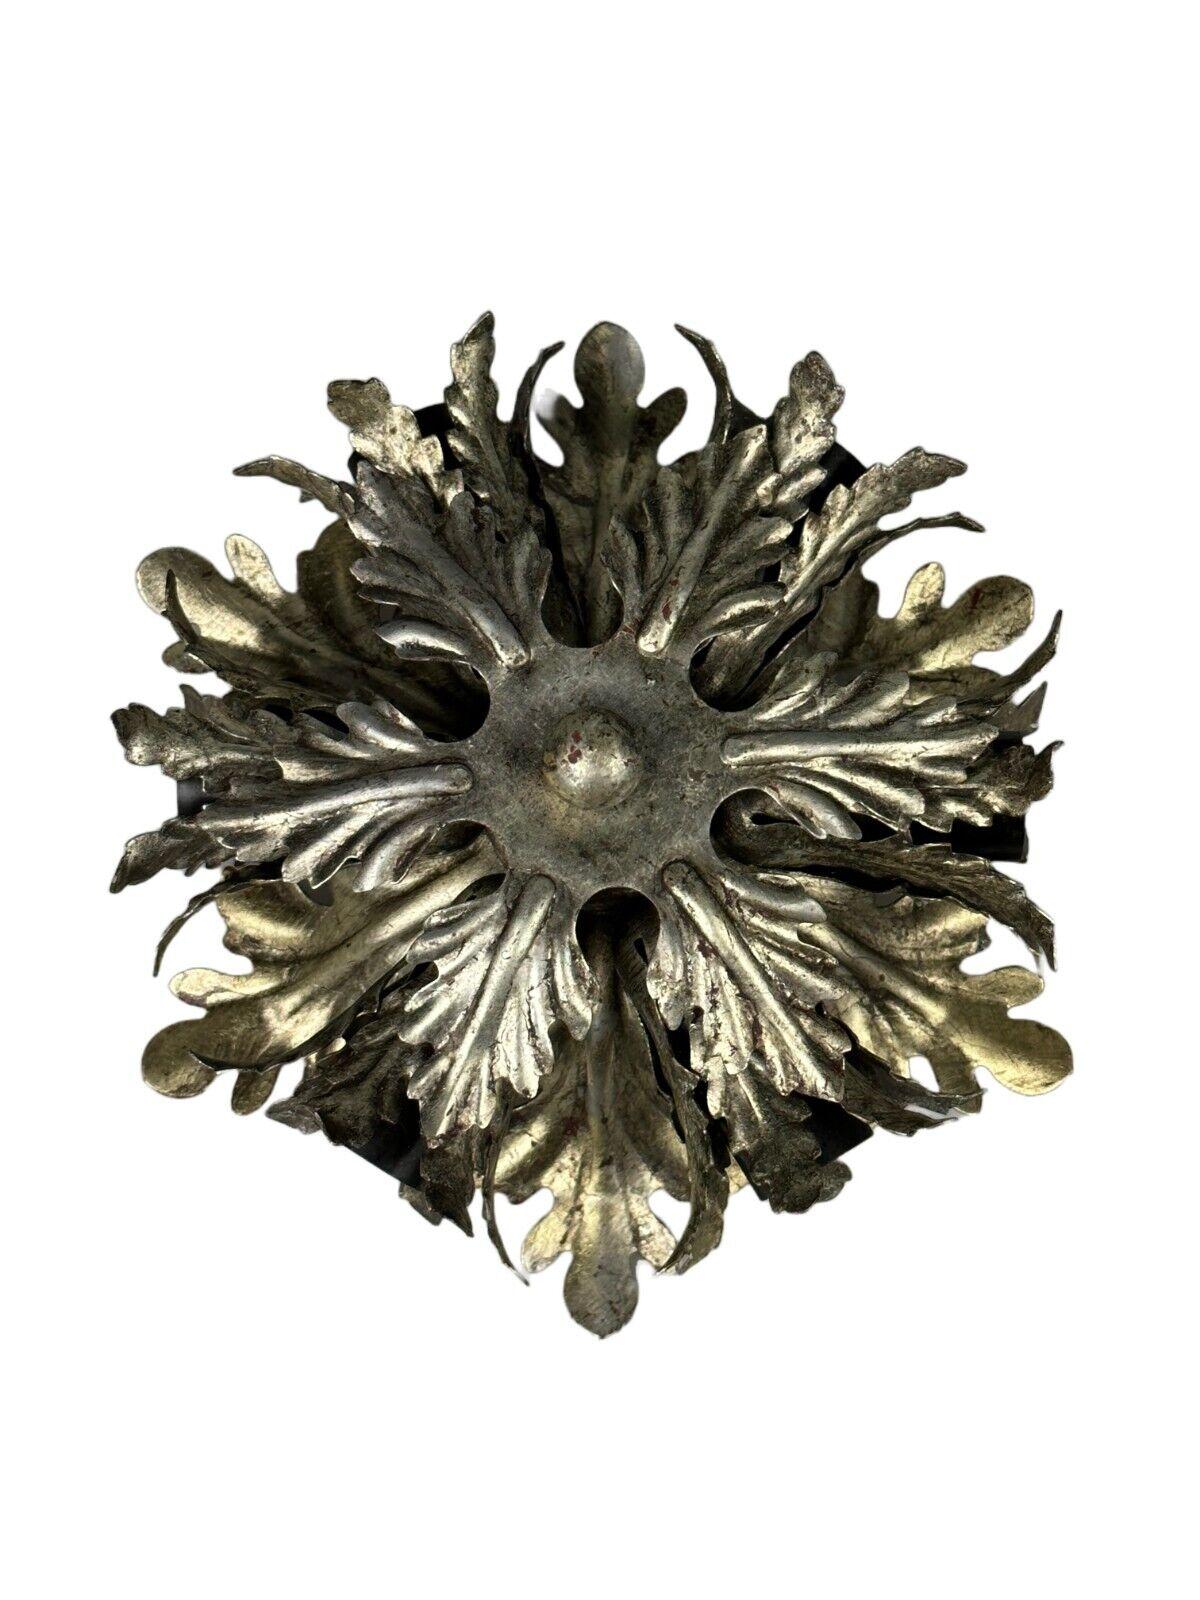 60s 70s wall lamp ceiling lamp Florentine metal Banci Firenze Design

Object: wall lamp

Manufacturer: Banci Firenze

Condition: good - vintage

Age: around 1960-1970

Dimensions:

Diameter = 20cm
Height = 10.5cm

Other notes:

6x E14 socket

The